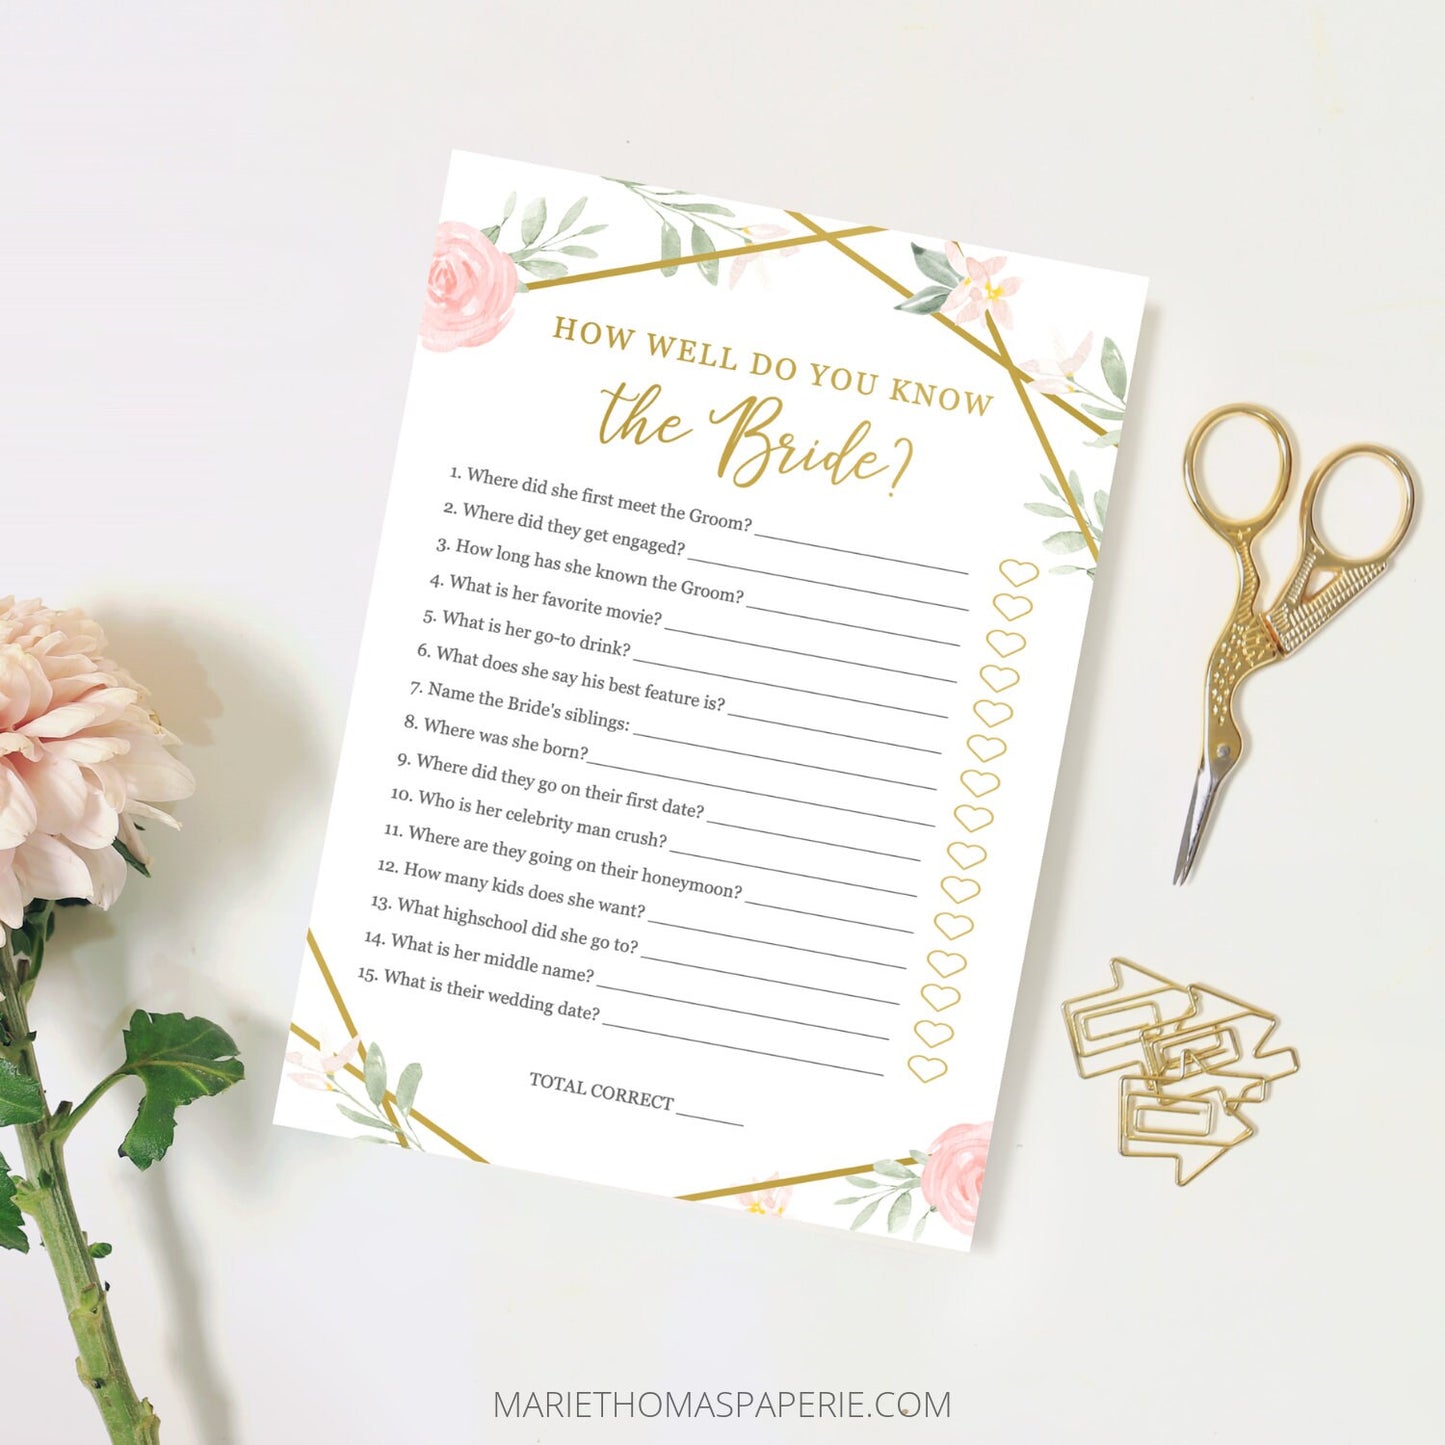 Editable How Well Do You Know the Bride Bridal Shower Games Wedding Games Template